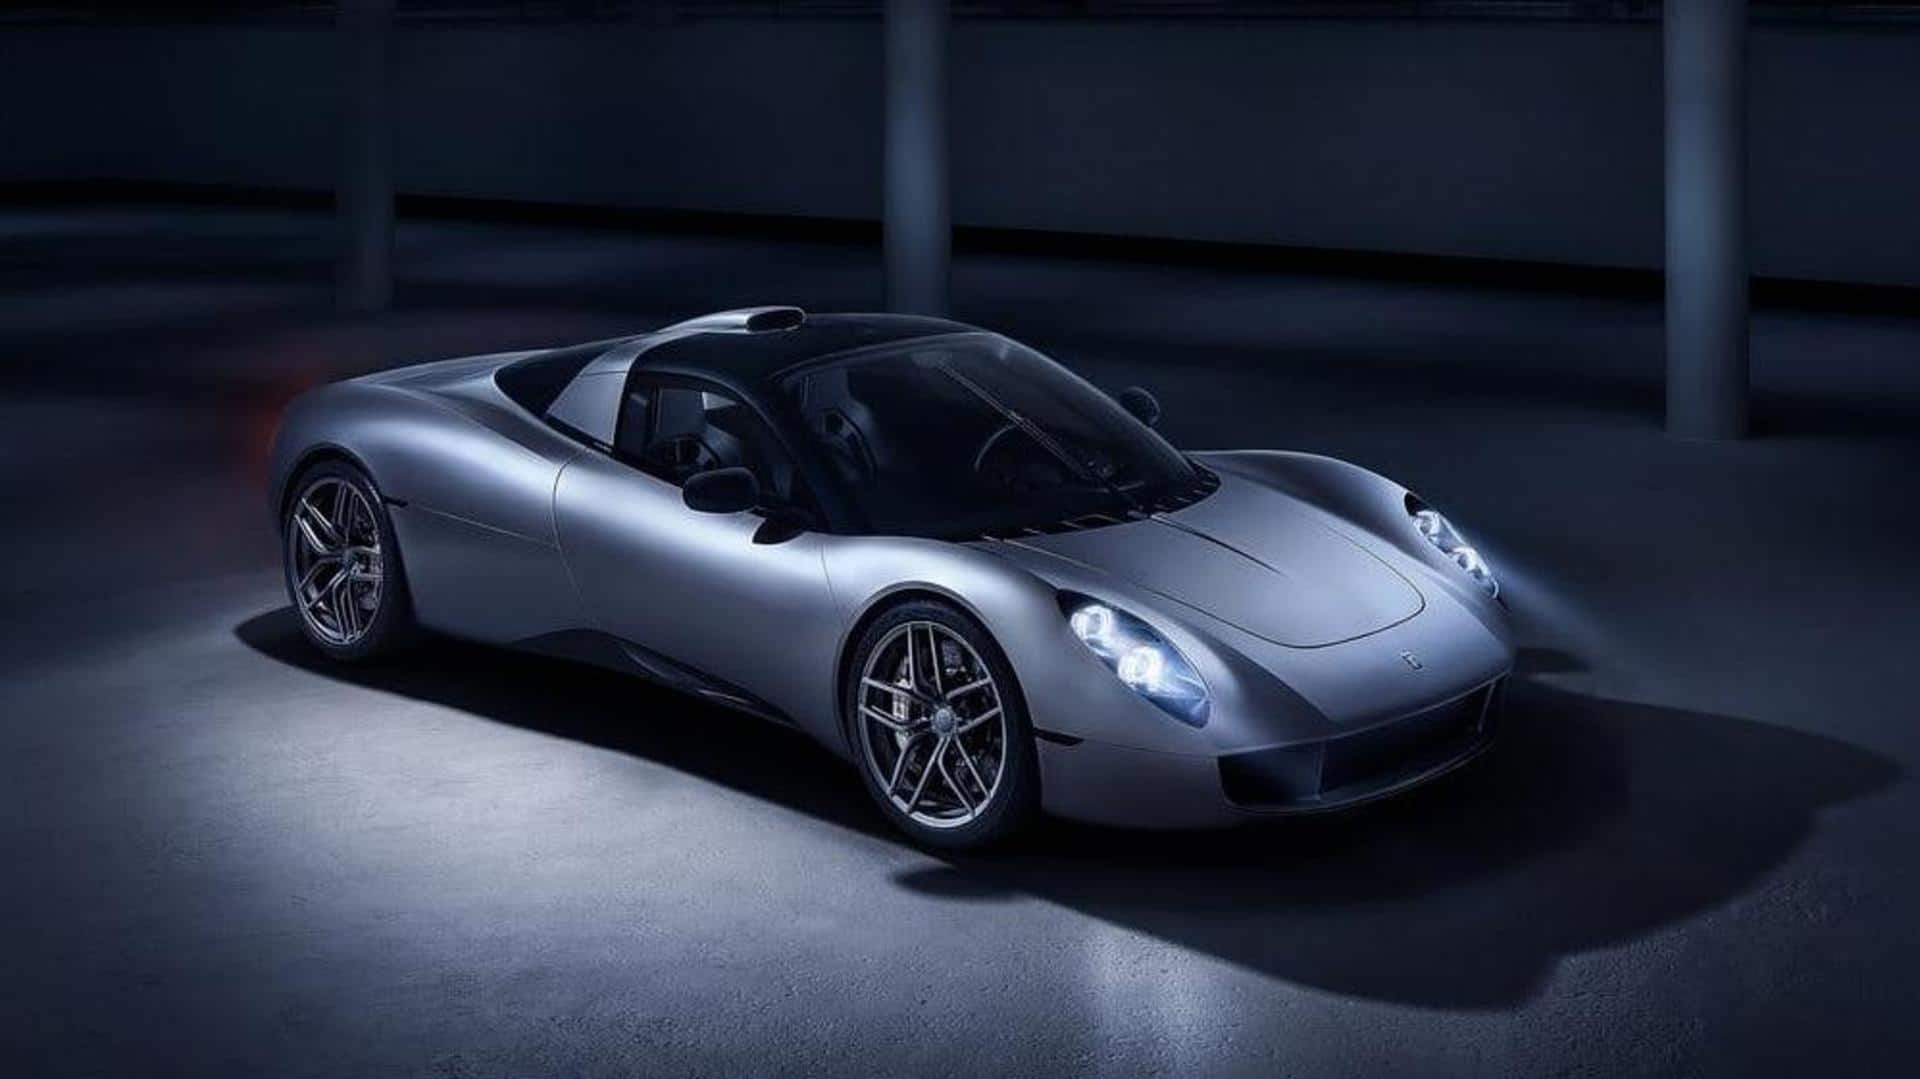 What to expect from the Gordon Murray T33 Spider supercar